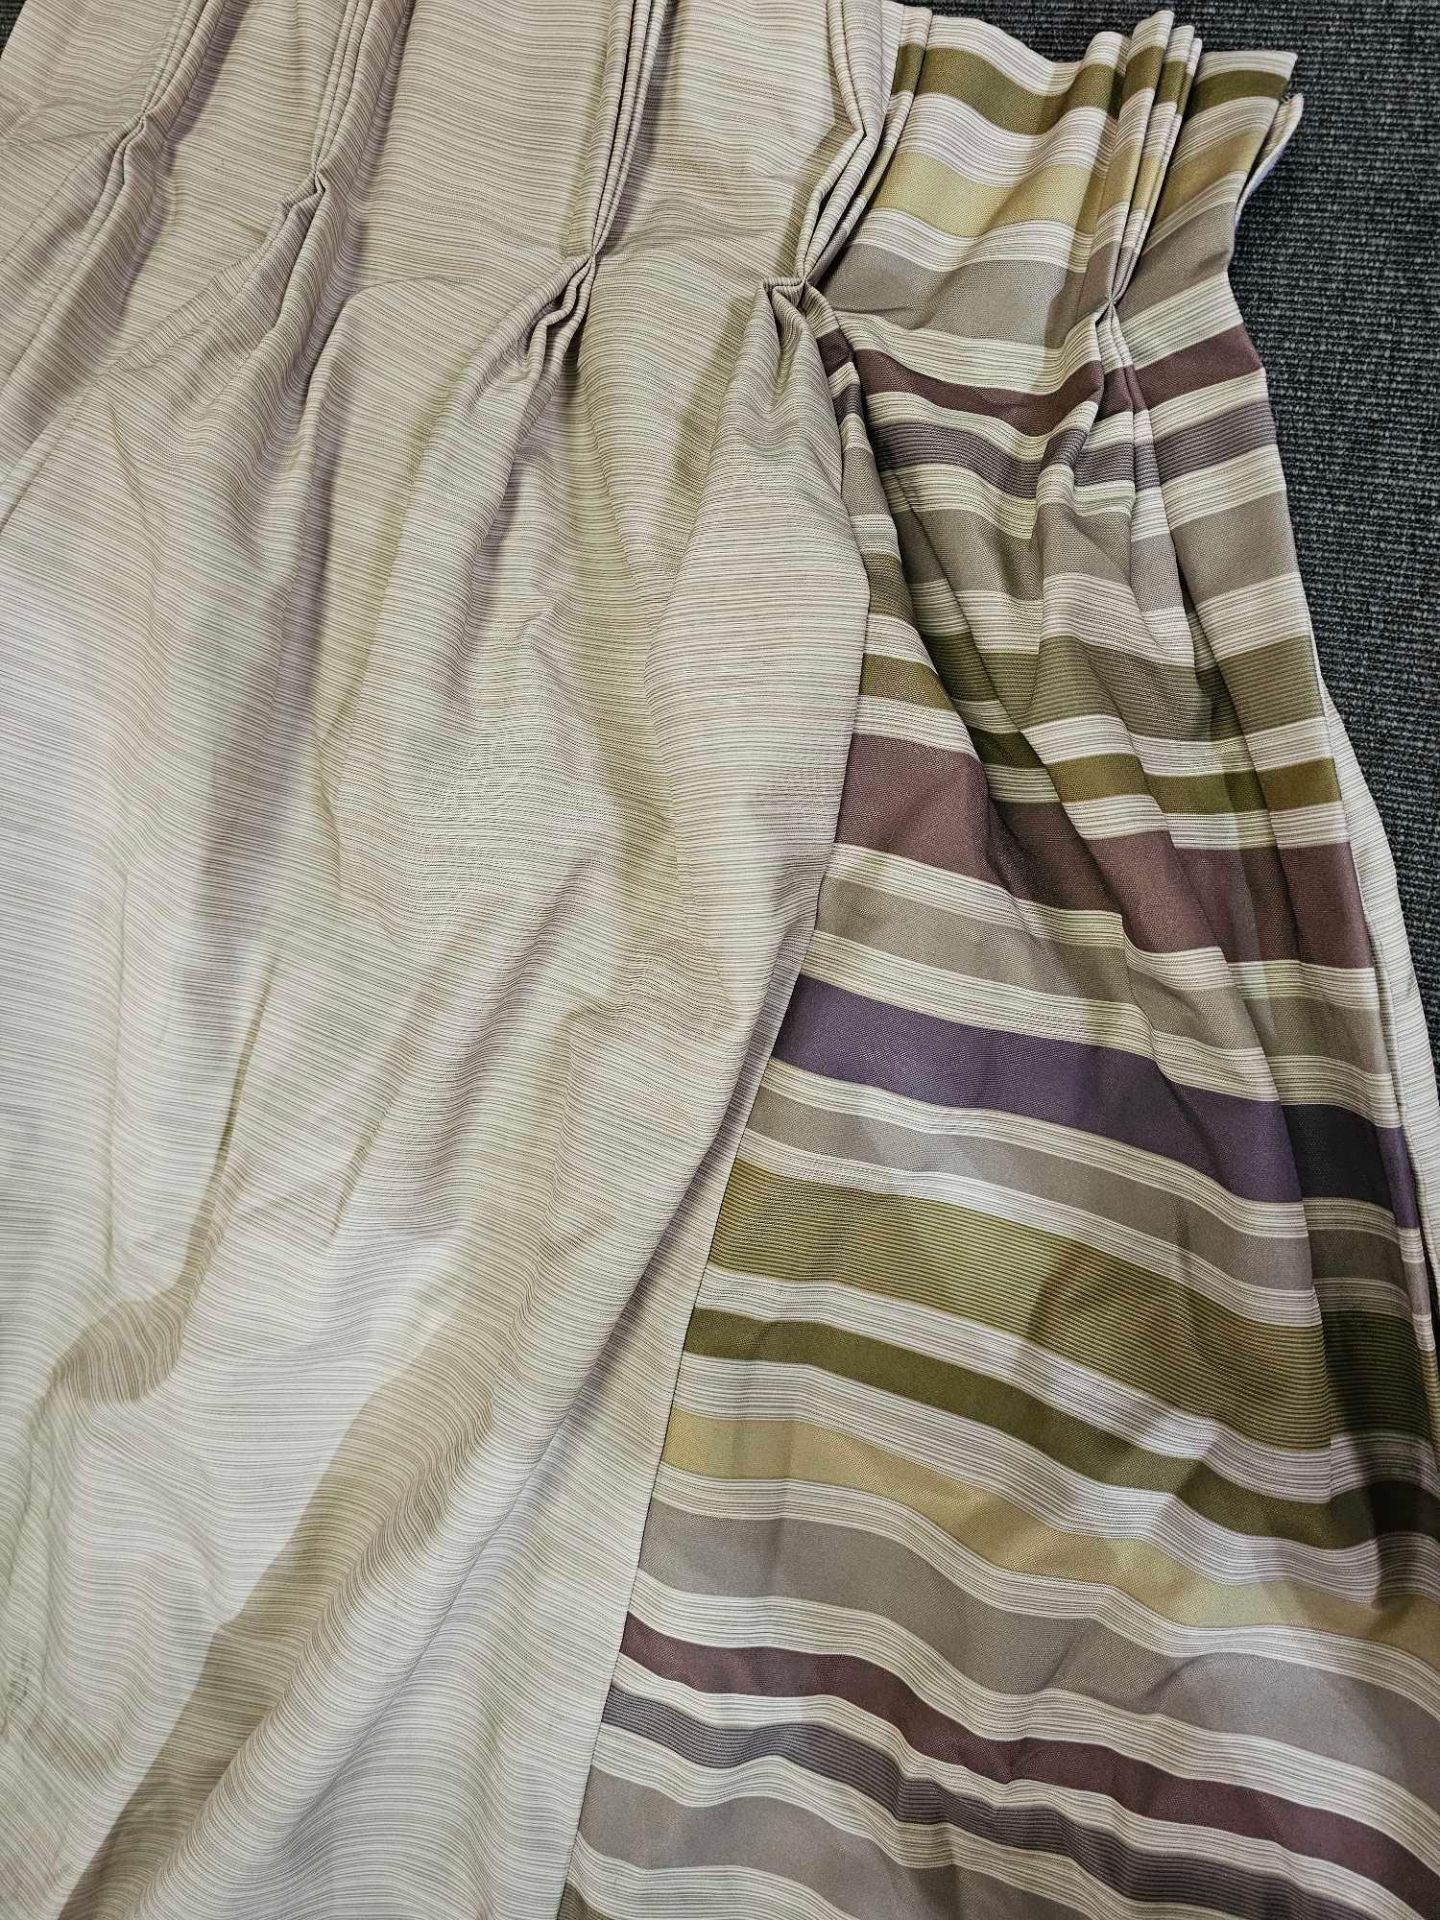 A Pair Of Curtains Striped Edge Purple/Green/Beige/Lime/Brown Size 284 x 250cm ( Ref Red 165) - Image 2 of 2